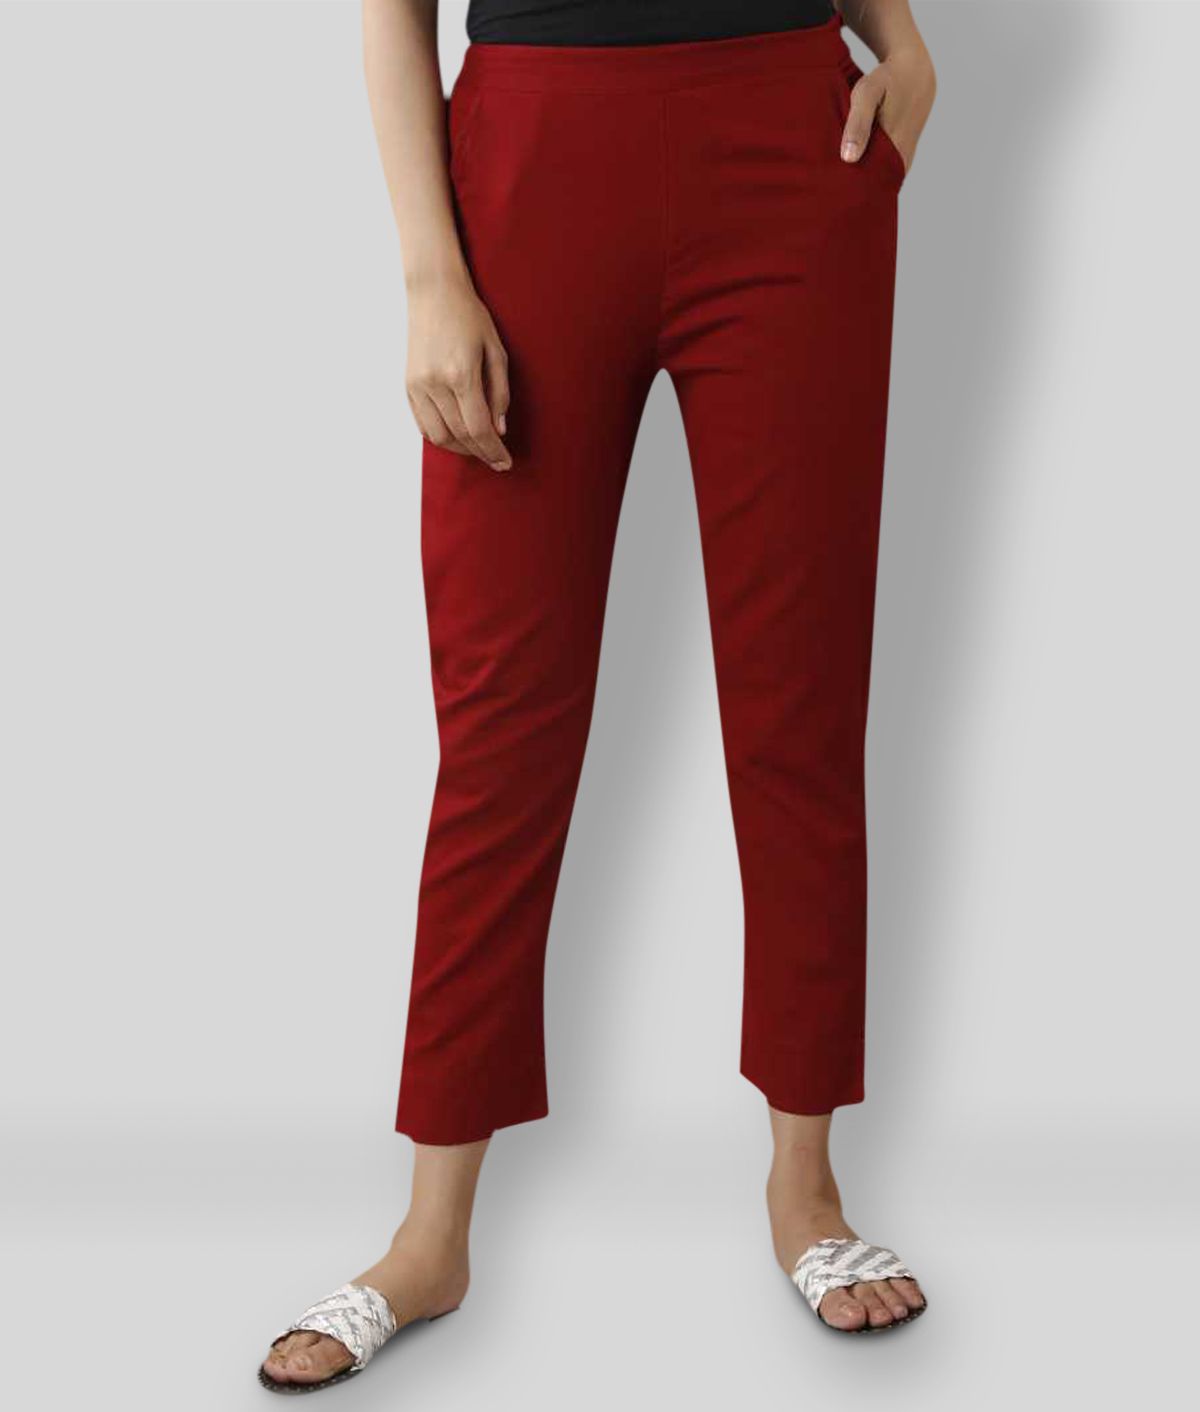 Sherine - Maroon Cotton Blend Straight Fit Women's Cigarette Pants  ( Pack of 1 )